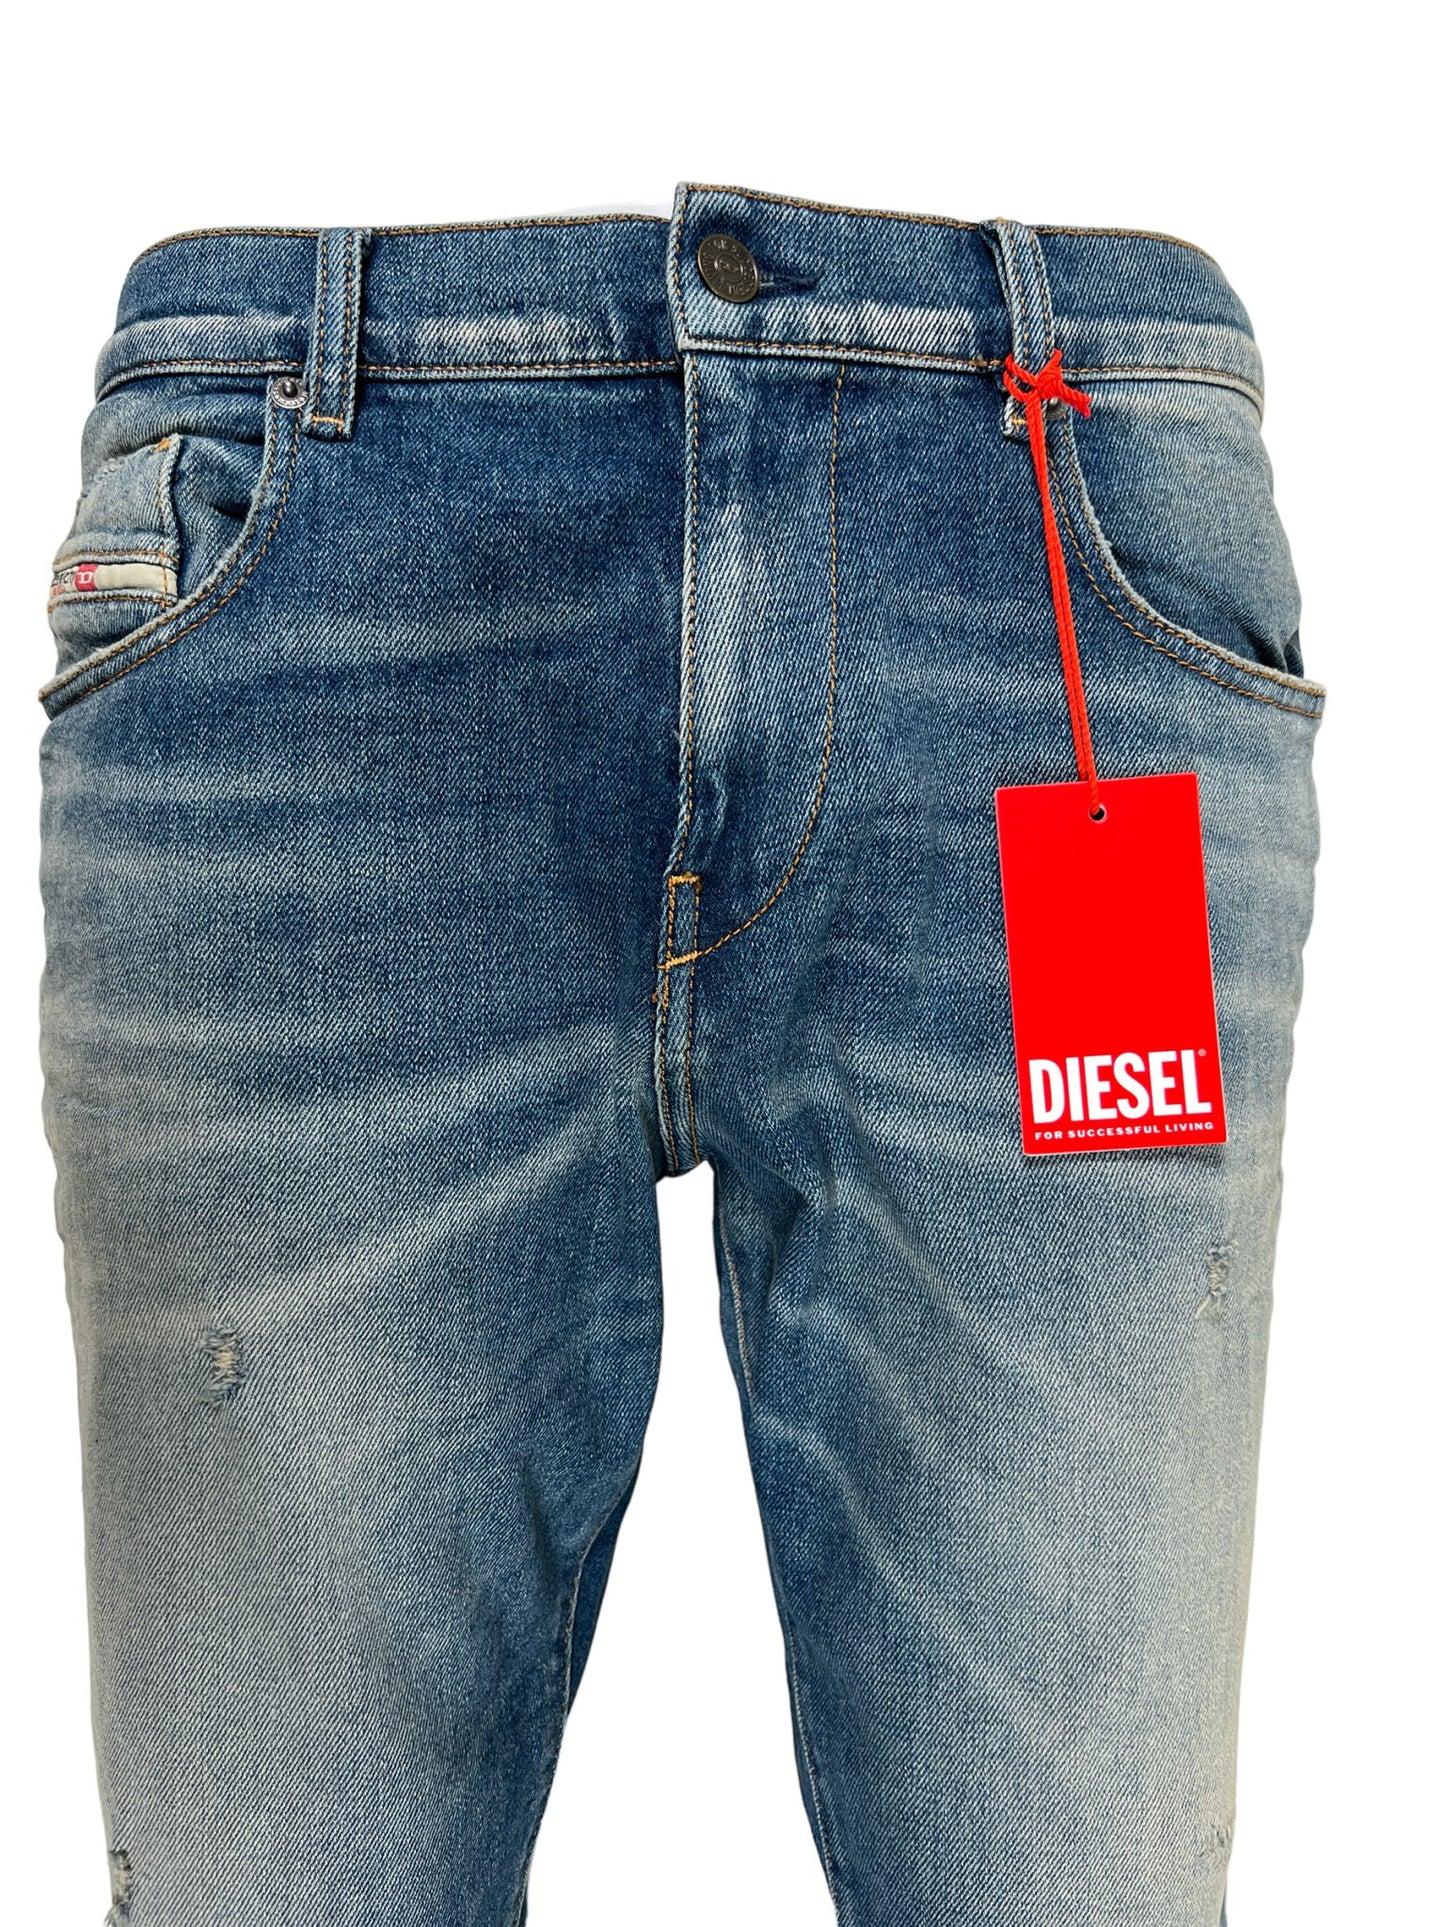 A pair of DIESEL 2019 D-STRUKT 9H55 DENIM slim fit jeans with a red tag on them.